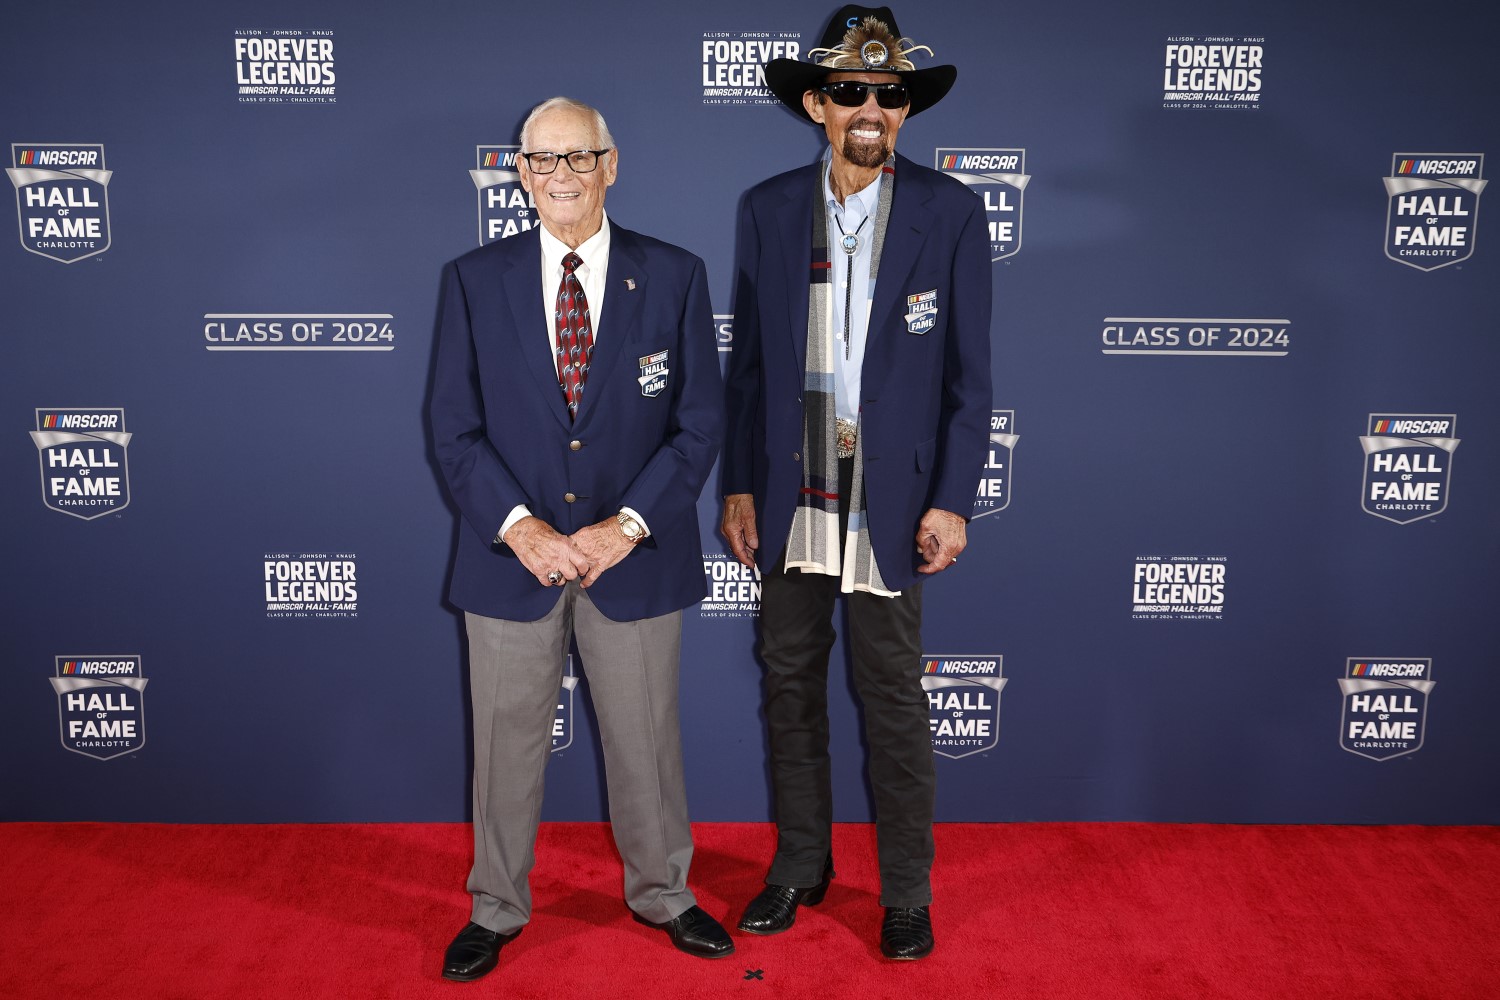 NASCAR Hall of Famers Dale Inman (L) and Richard Petty pose for photos on the red carpet prior to the 2024 NASCAR Hall of Fame Induction Ceremony at Charlotte Convention Center on January 19, 2024 in Charlotte, North Carolina. (Photo by Chris Graythen/Getty Images)